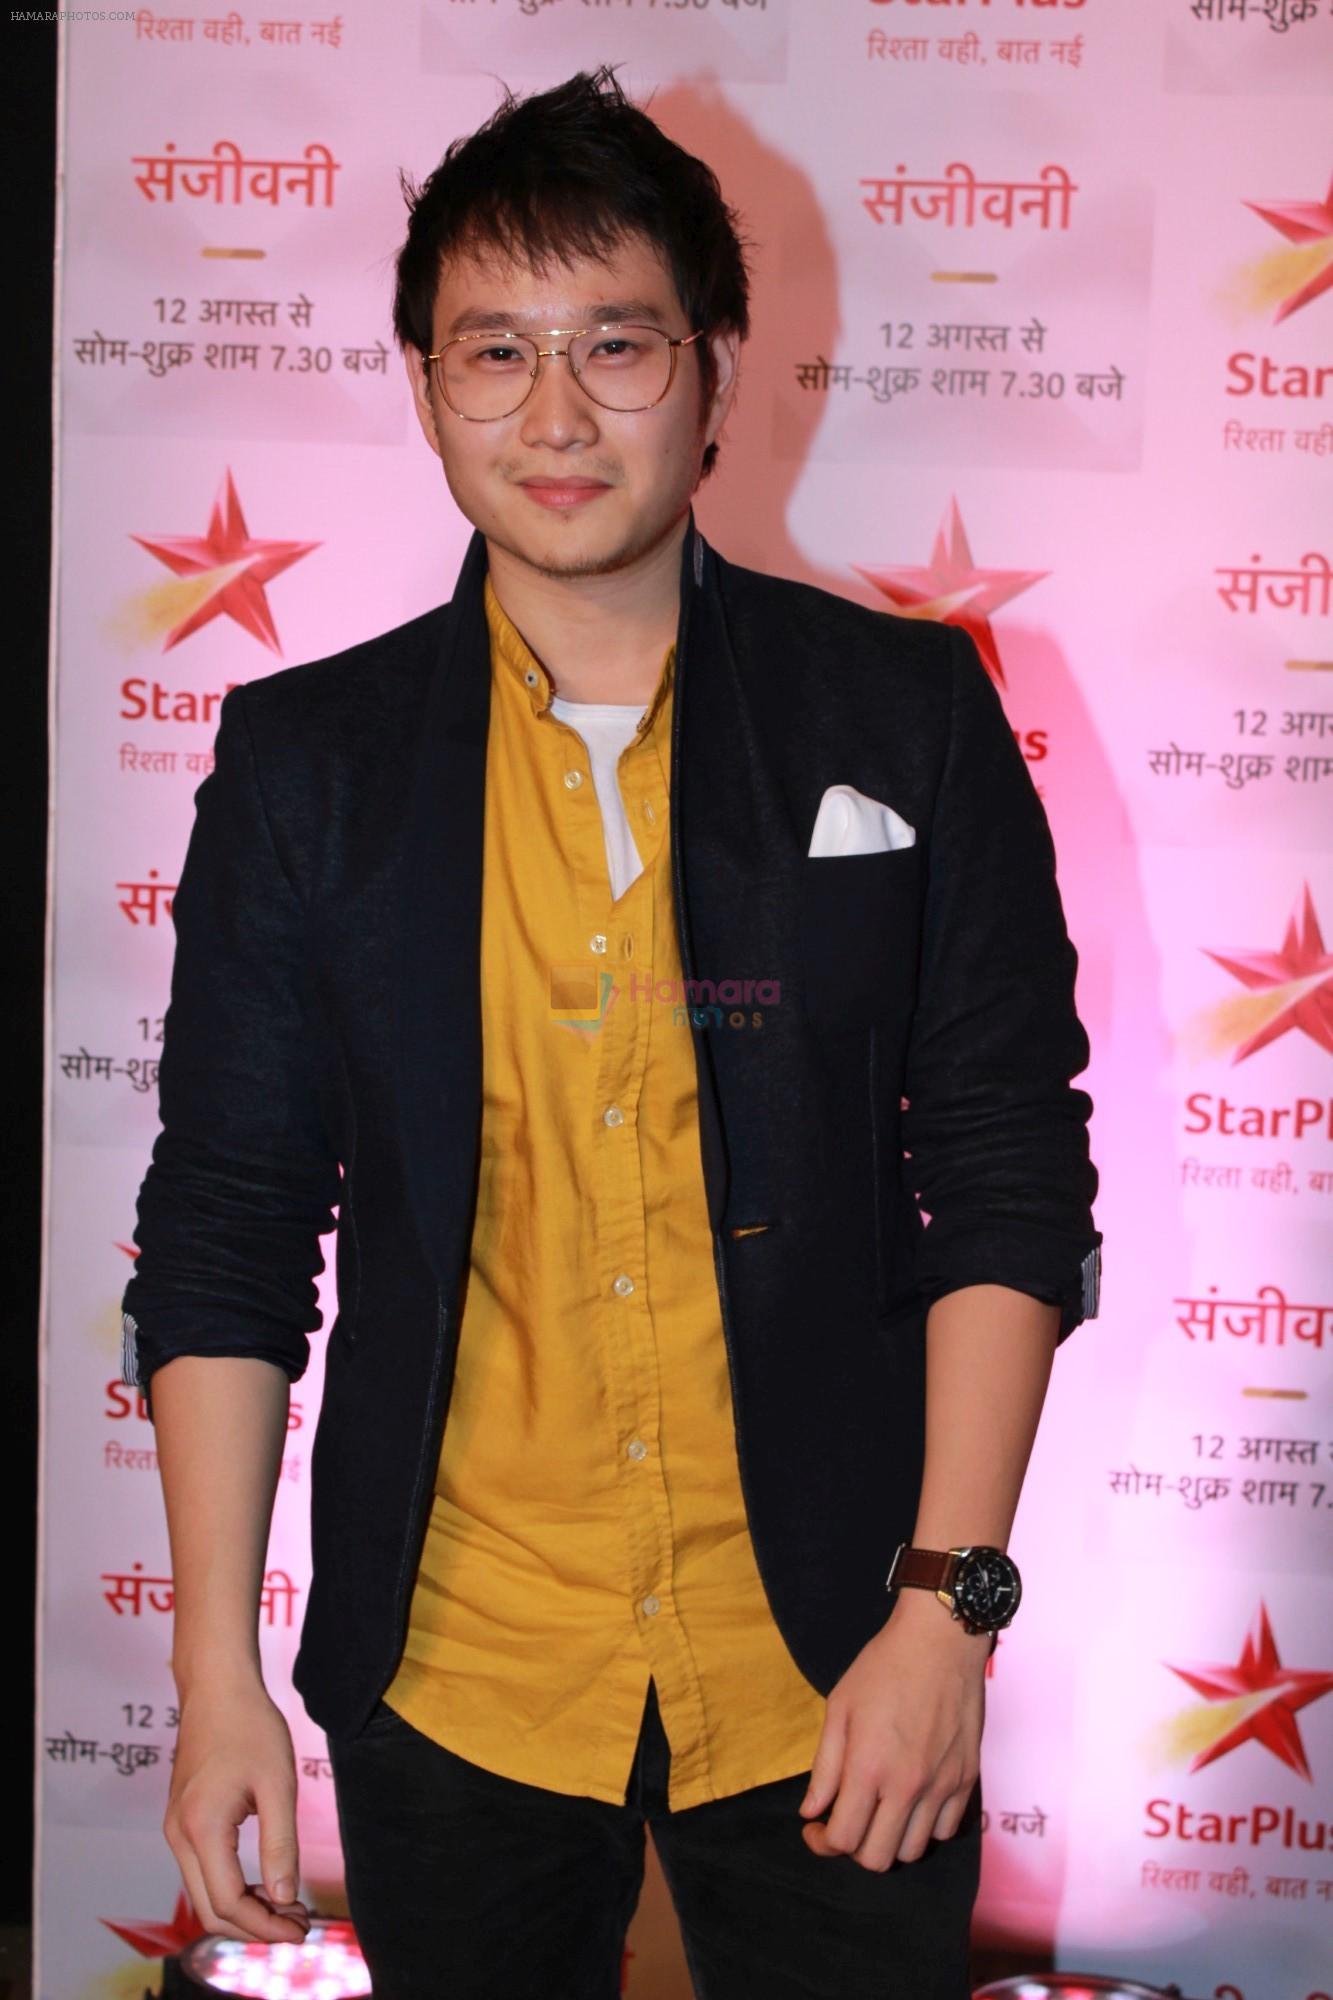 at the Red Carpet of Star Plus serial Sanjivani 2 on 31st July 2019